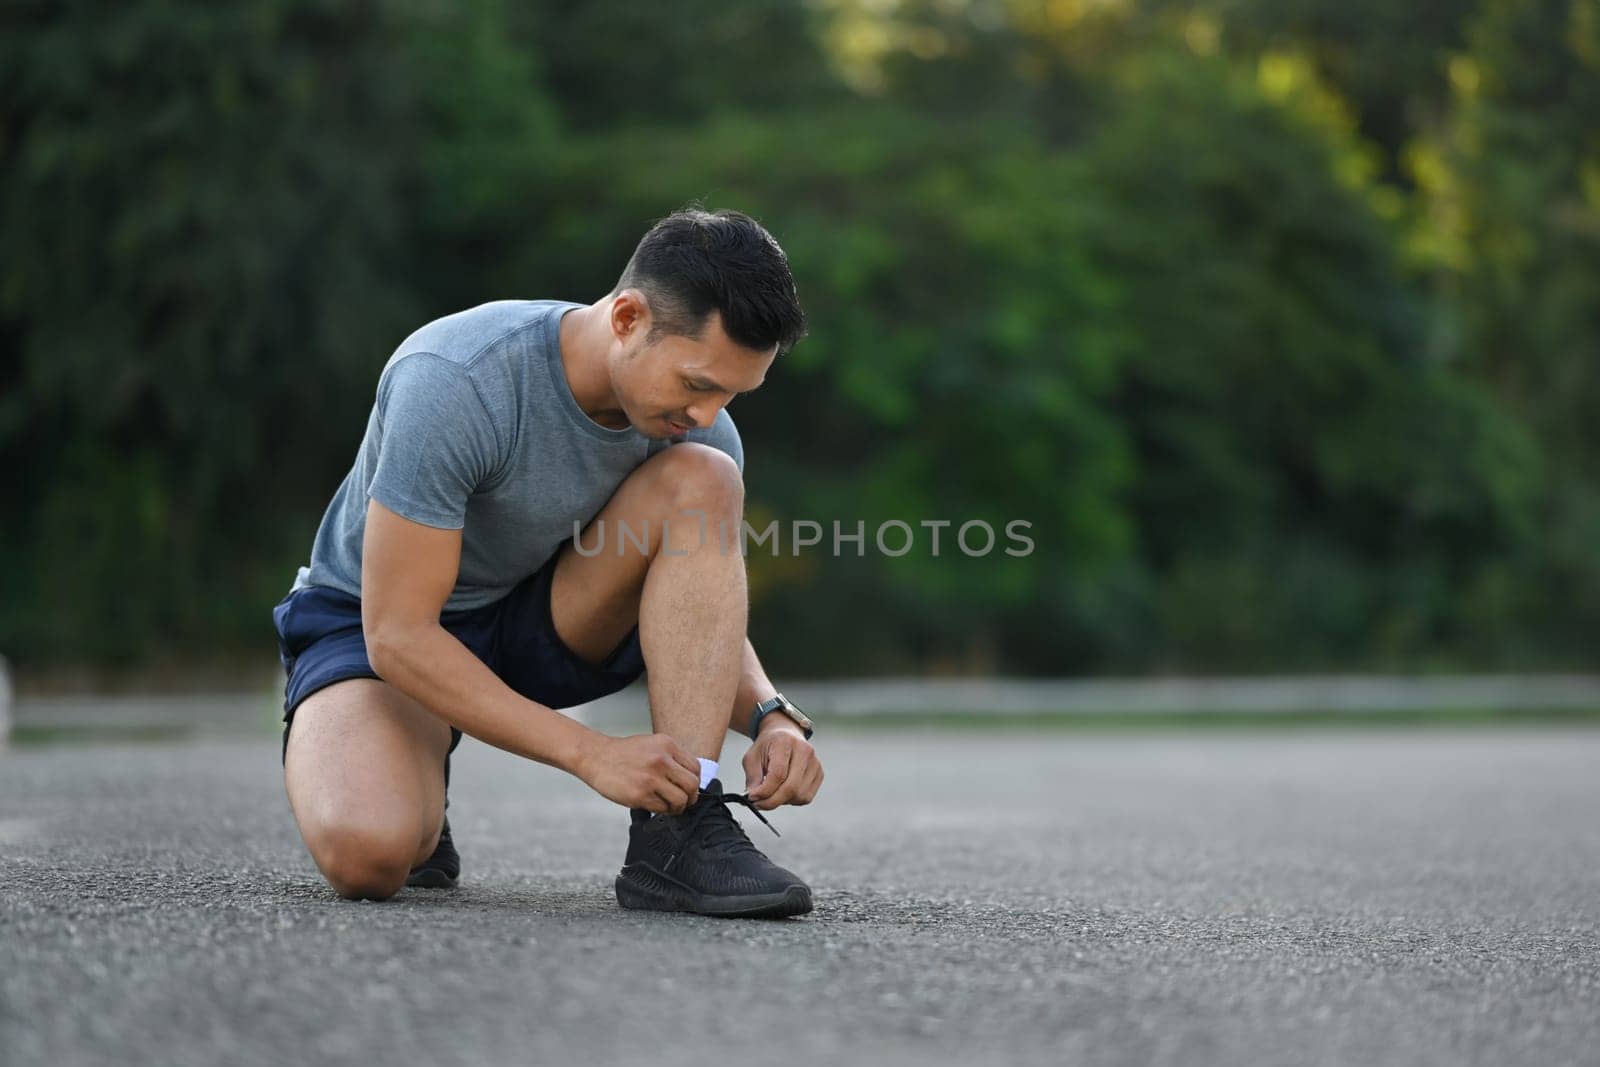 Young sportsman tying shoelace ready for morning jogging. Workout and healthy lifestyle concept.